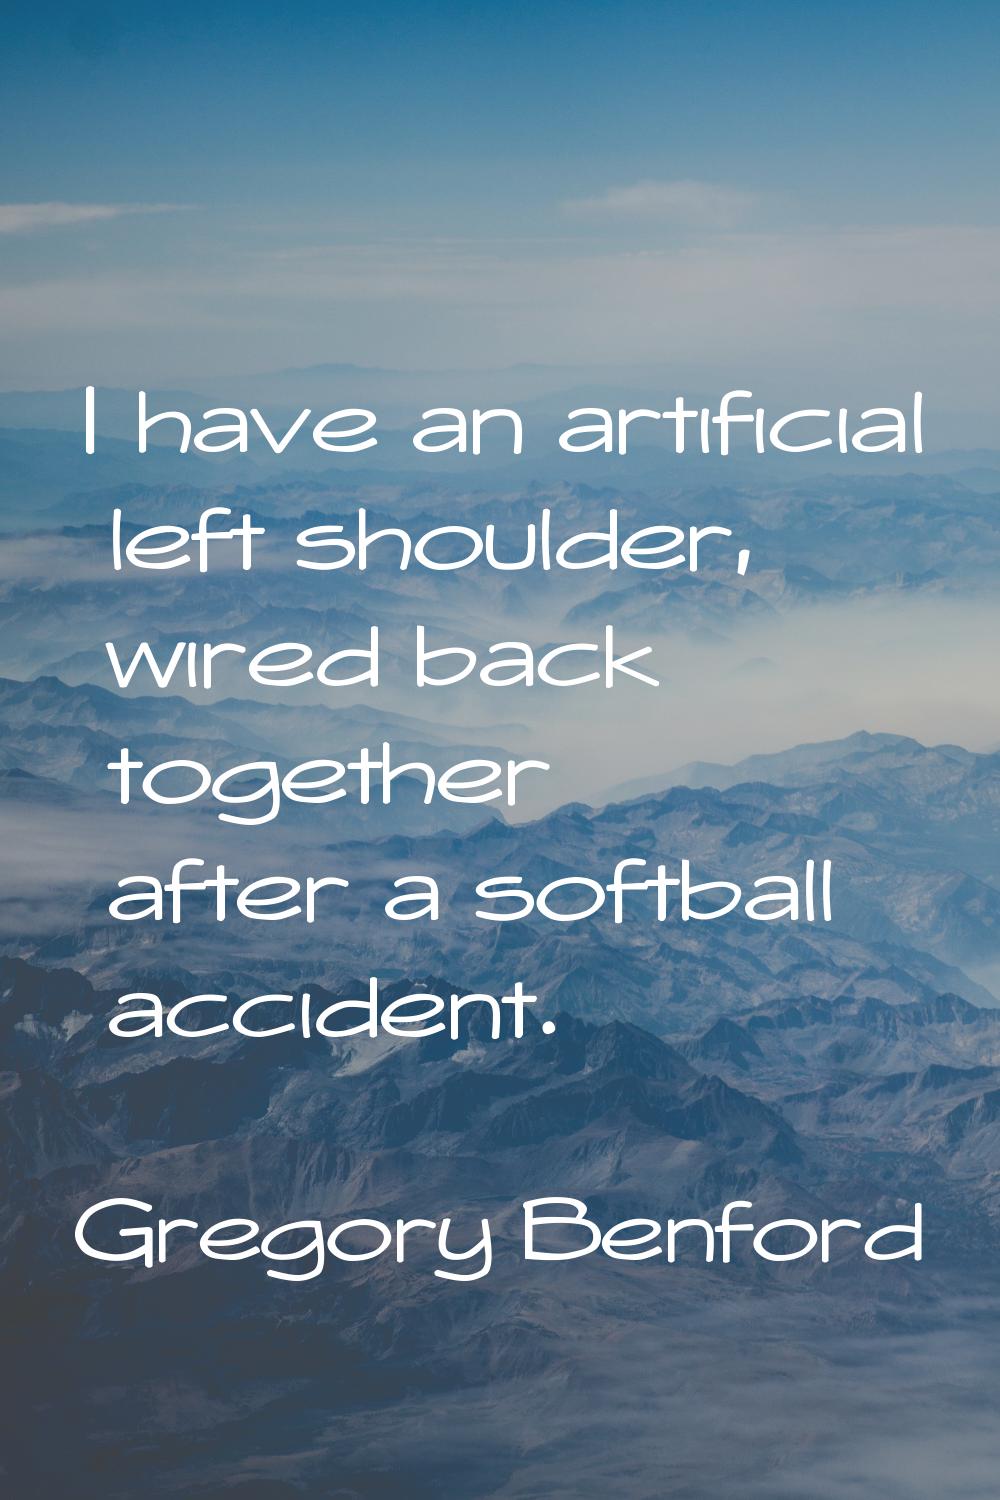 I have an artificial left shoulder, wired back together after a softball accident.